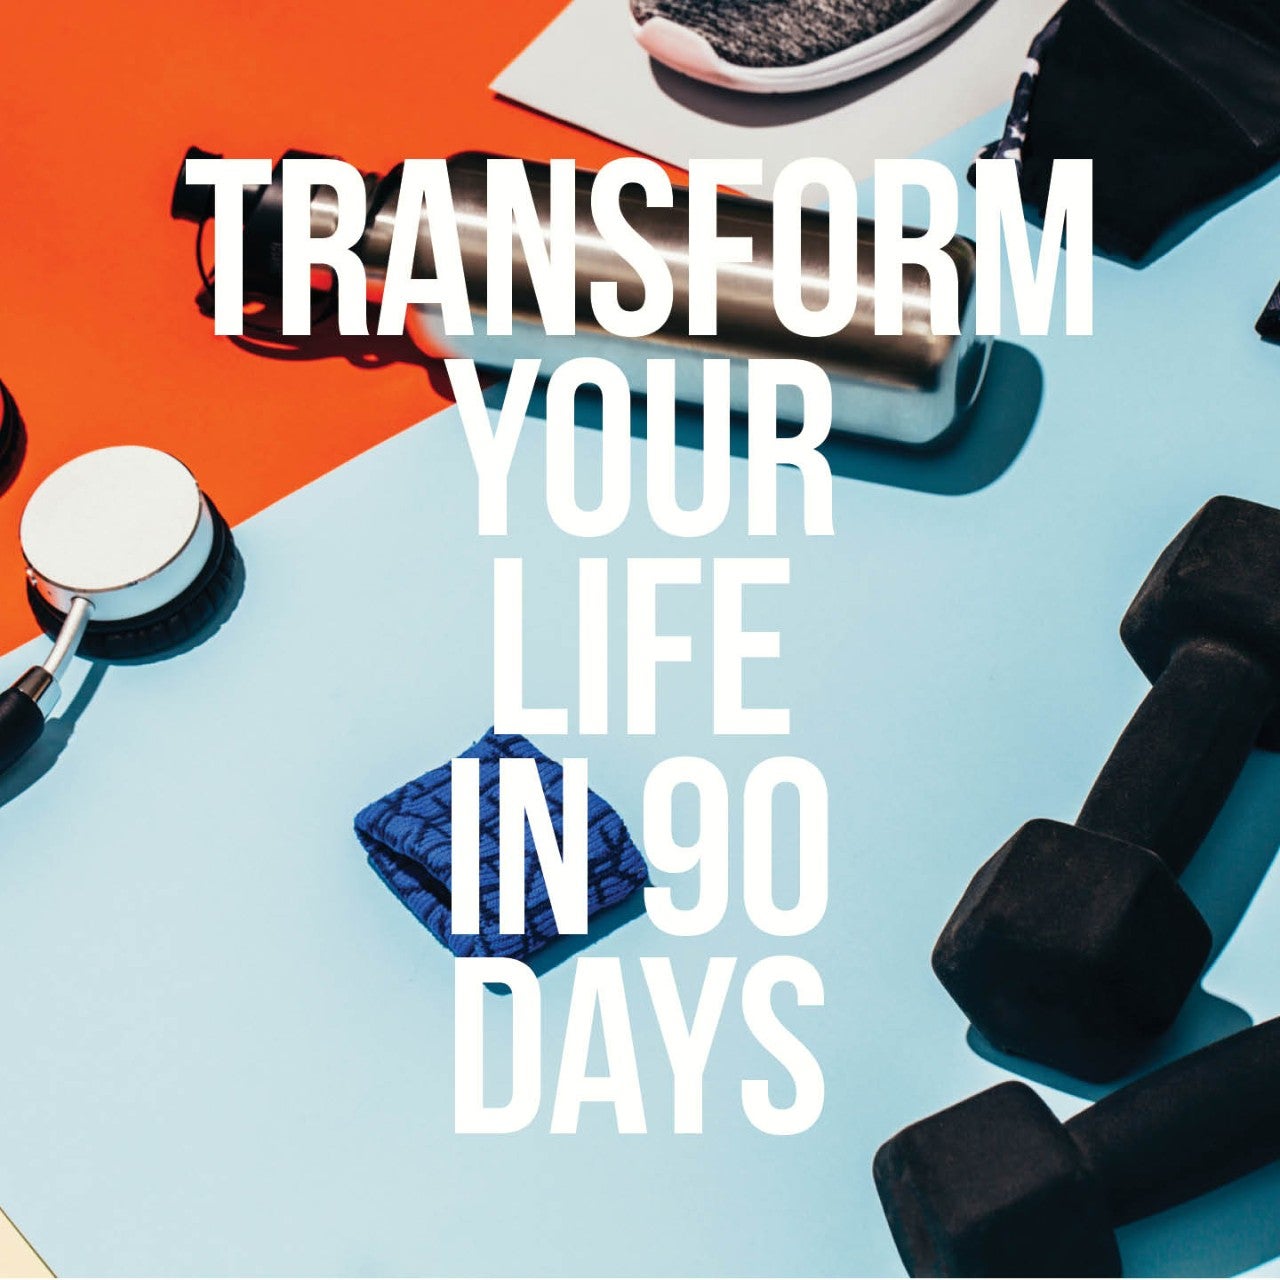 TR90 Meme Exercise Gear Transform Your Life in 90 Days